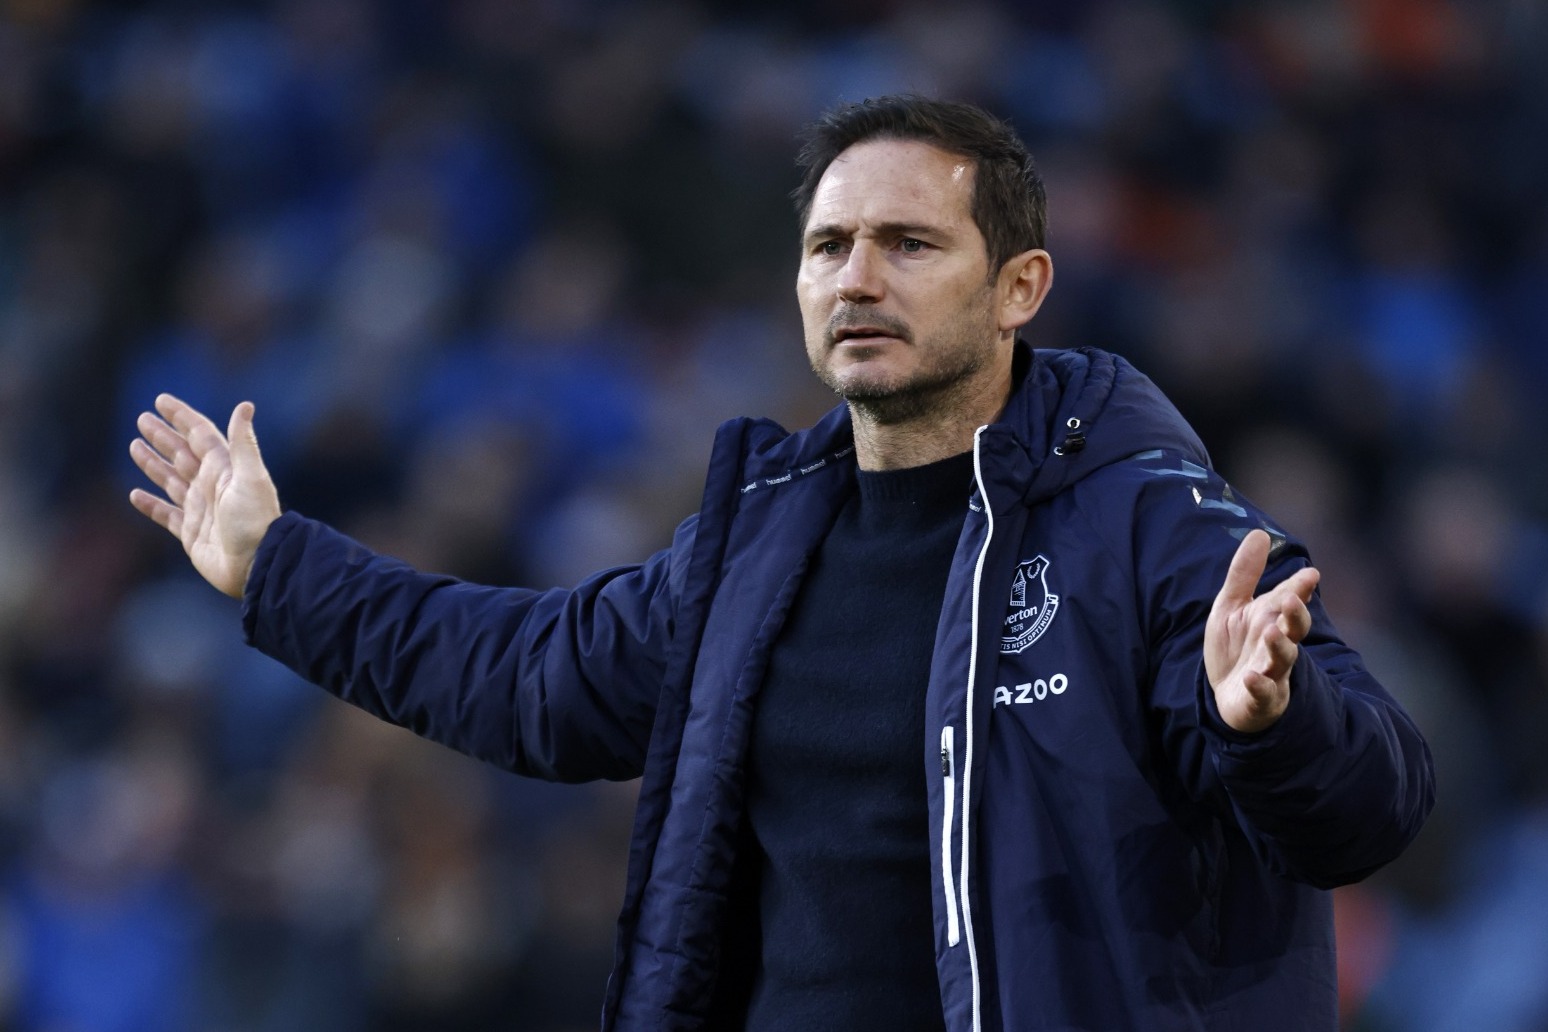 Everton manager Frank Lampard fined by FA for Merseyside derby comments 